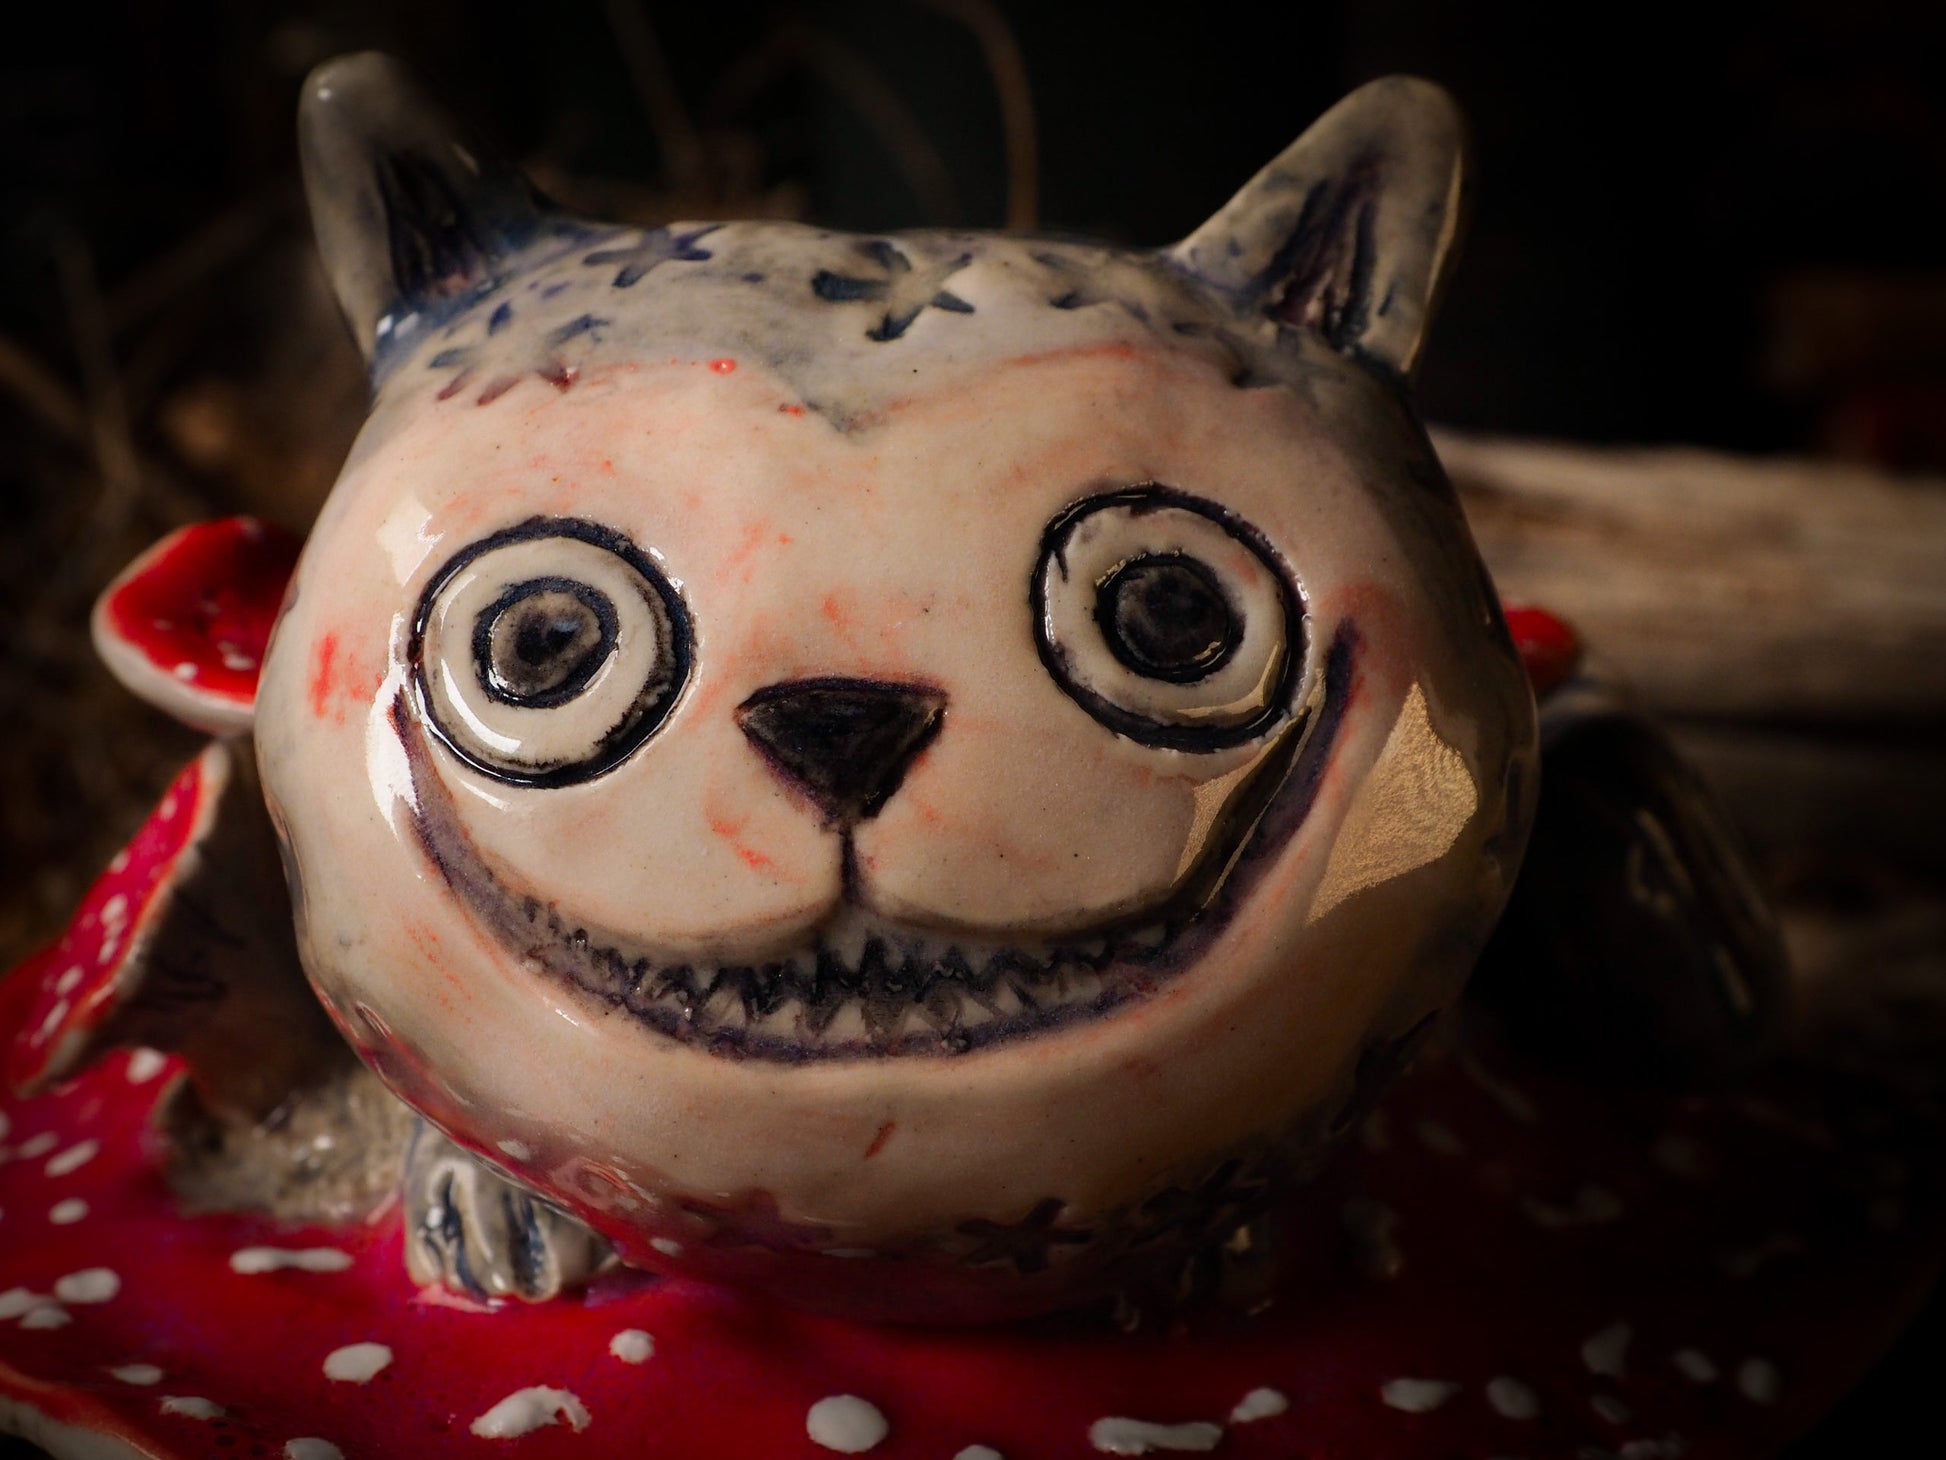 Cheshire Cat vintage pet ceramic figure inspired by Alice in Wonderland made by Idania Salcido, the mixed media artist and ceramist behind Danita Art. Earth clay is hand sculpted and glazed and kiln fired to create a ceramic home decor heirloom figurine. Each unique art piece is a one of a kind fine pottery artwork.